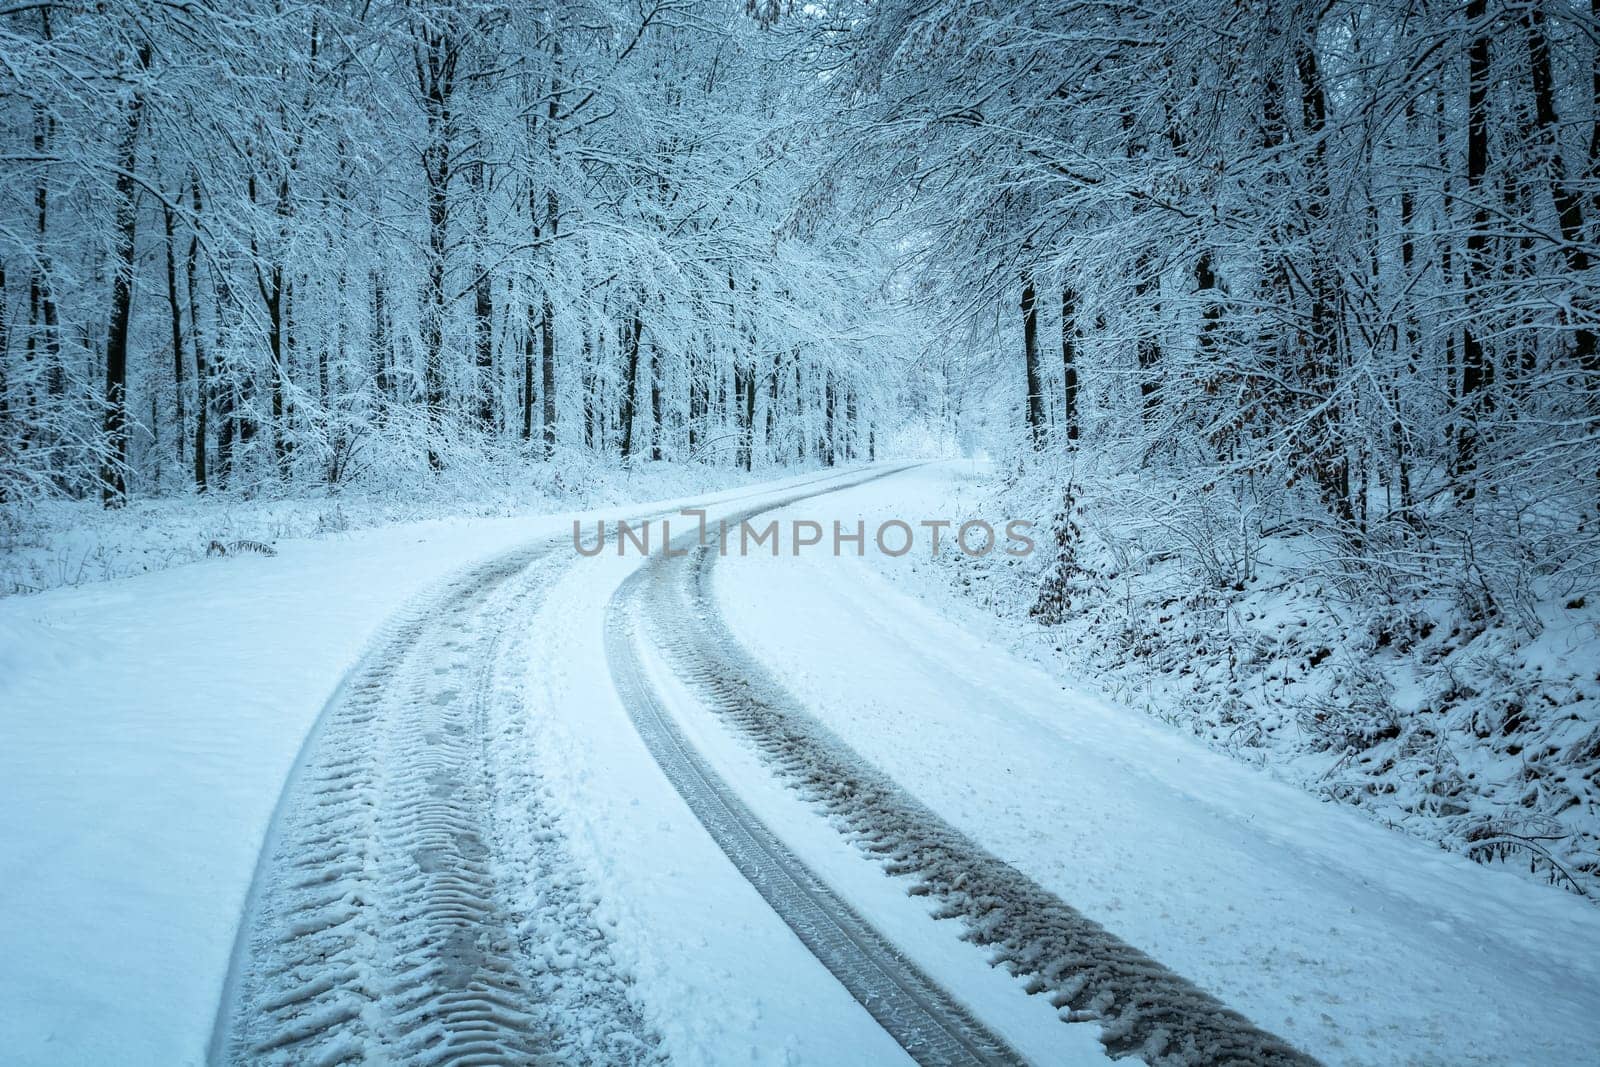 Wheel tracks on a snow-covered road in the winter forest